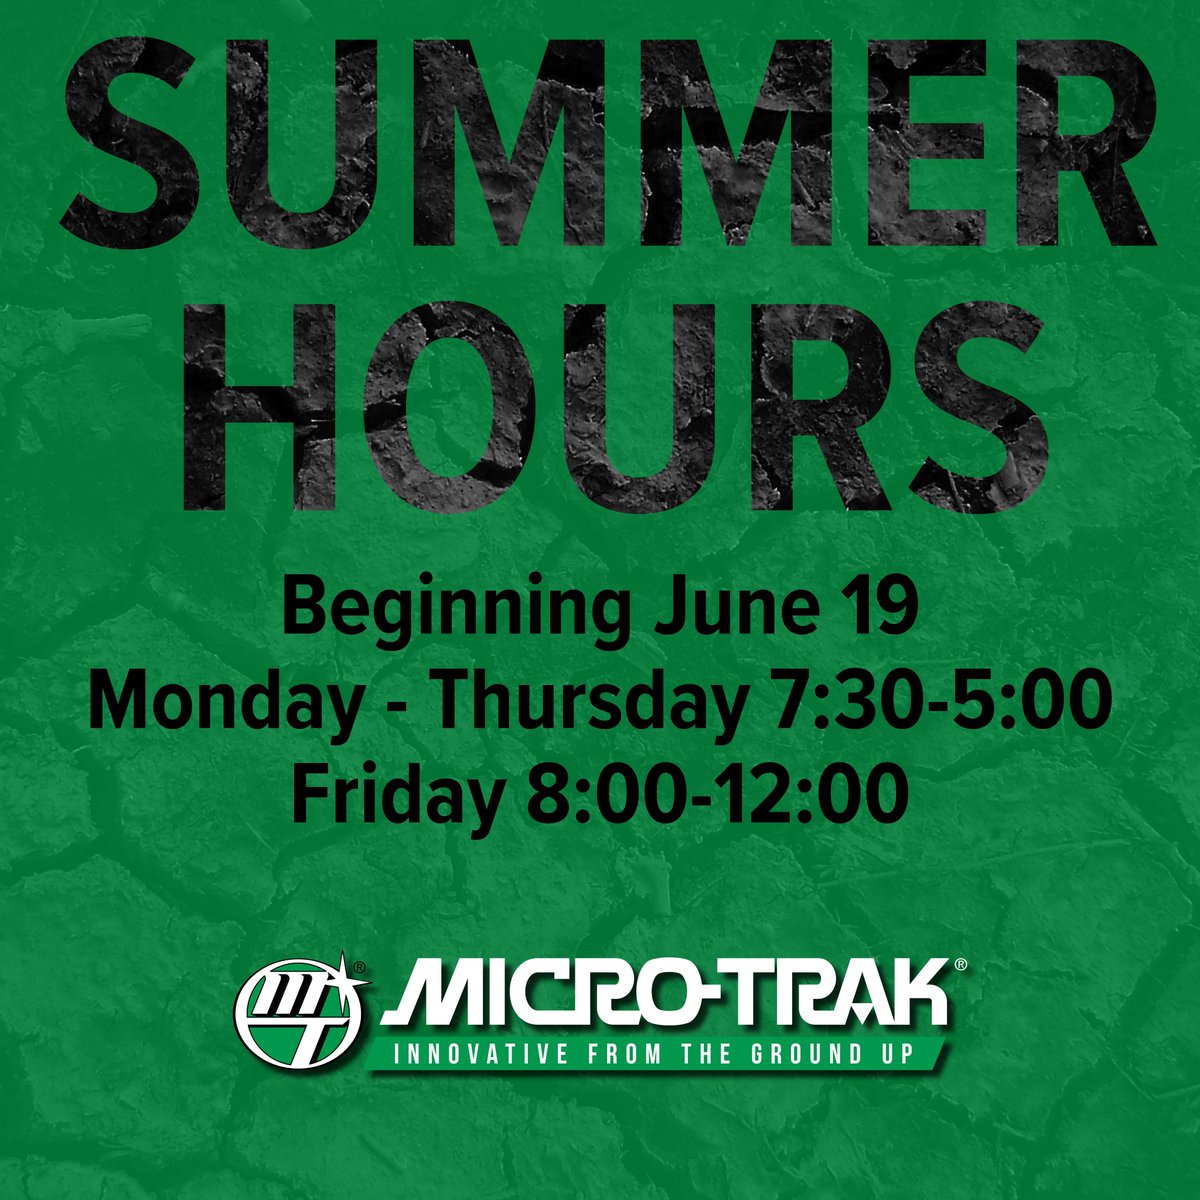 Just an FYI to all our clients: Micro-Trak employees began summer hours today to take advantage of Minnesota's warm weather season!

#microtrak #summerhours https://t.co/AafWg2GpQm